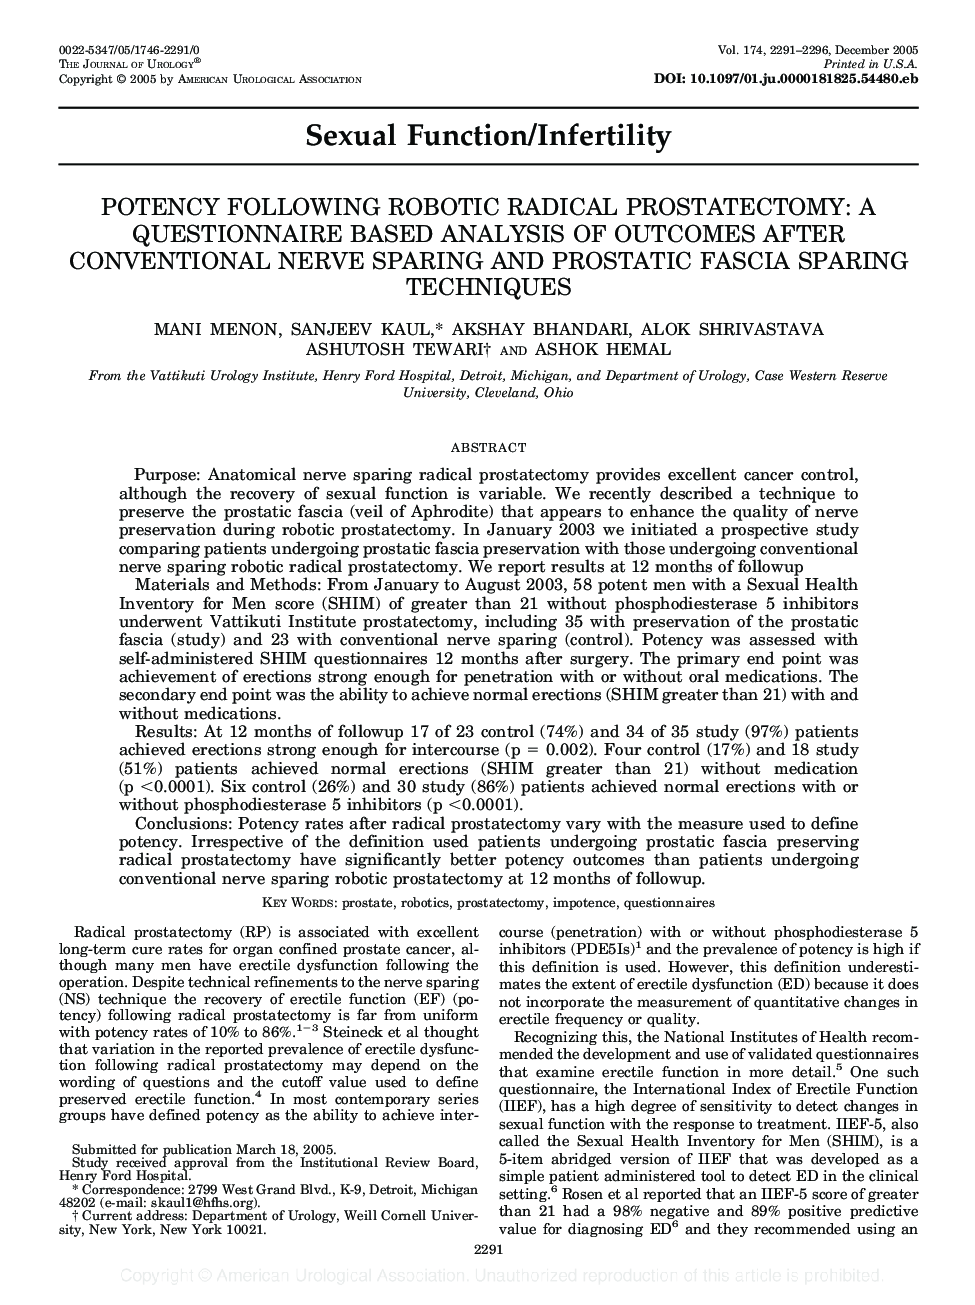 POTENCY FOLLOWING ROBOTIC RADICAL PROSTATECTOMY: A QUESTIONNAIRE BASED ANALYSIS OF OUTCOMES AFTER CONVENTIONAL NERVE SPARING AND PROSTATIC FASCIA SPARING TECHNIQUES 